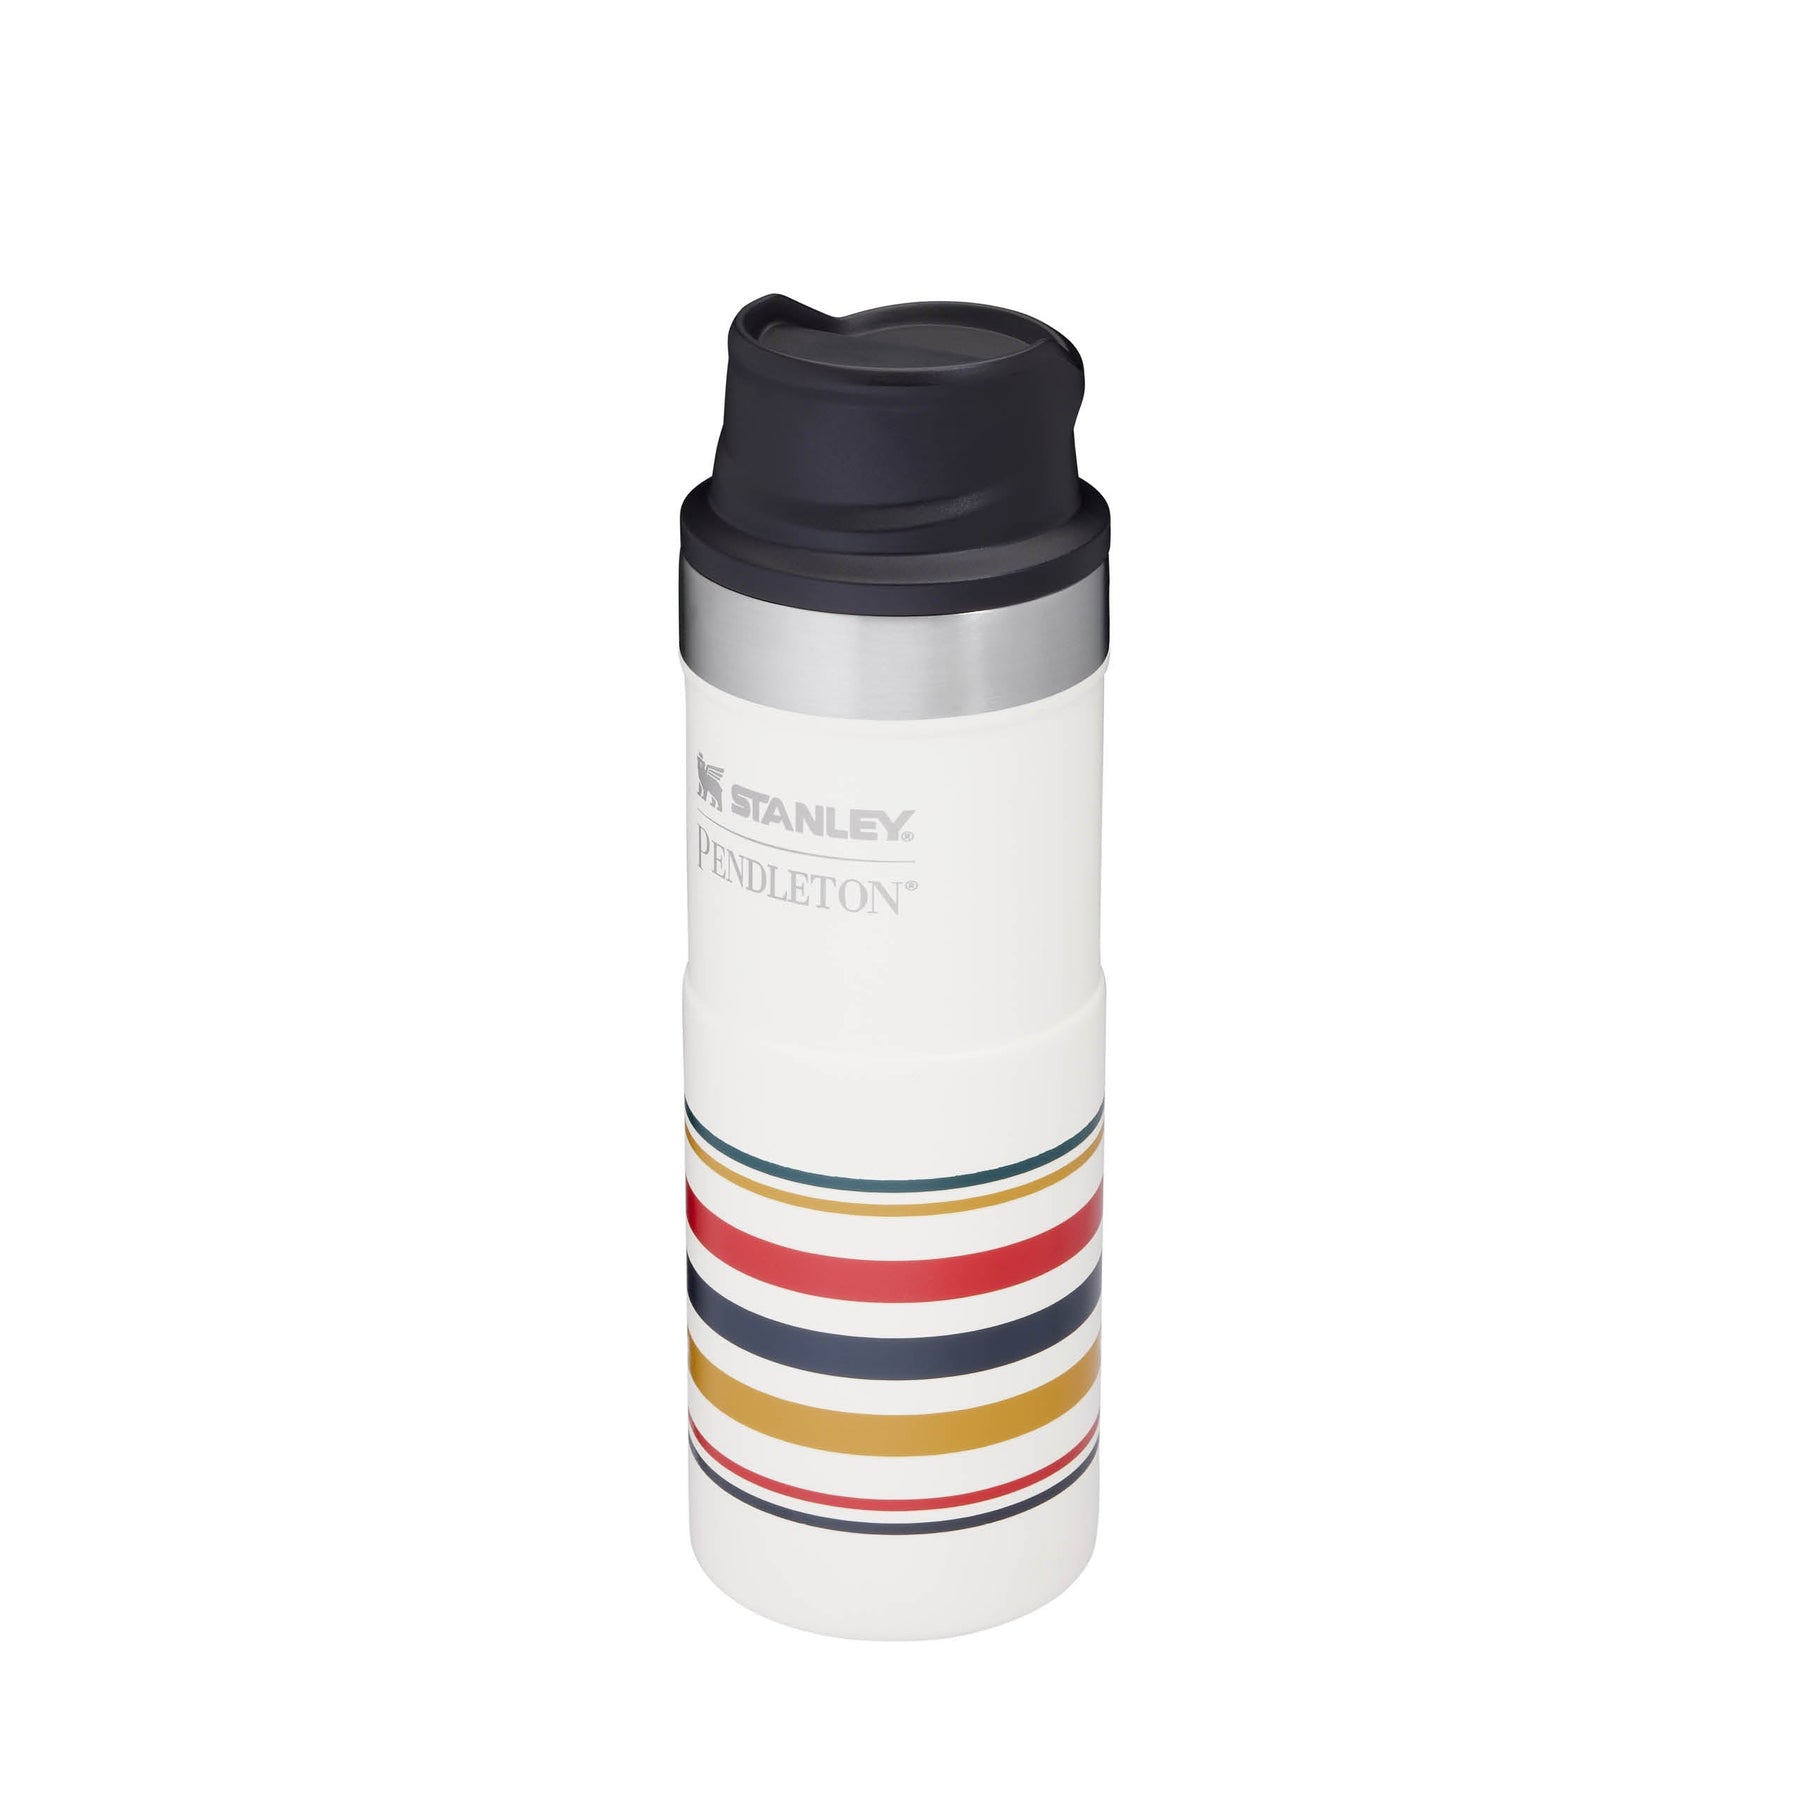 Stanley Pendleton Patterned 1.5qt Thermos, Grand Canyon White (1543417)